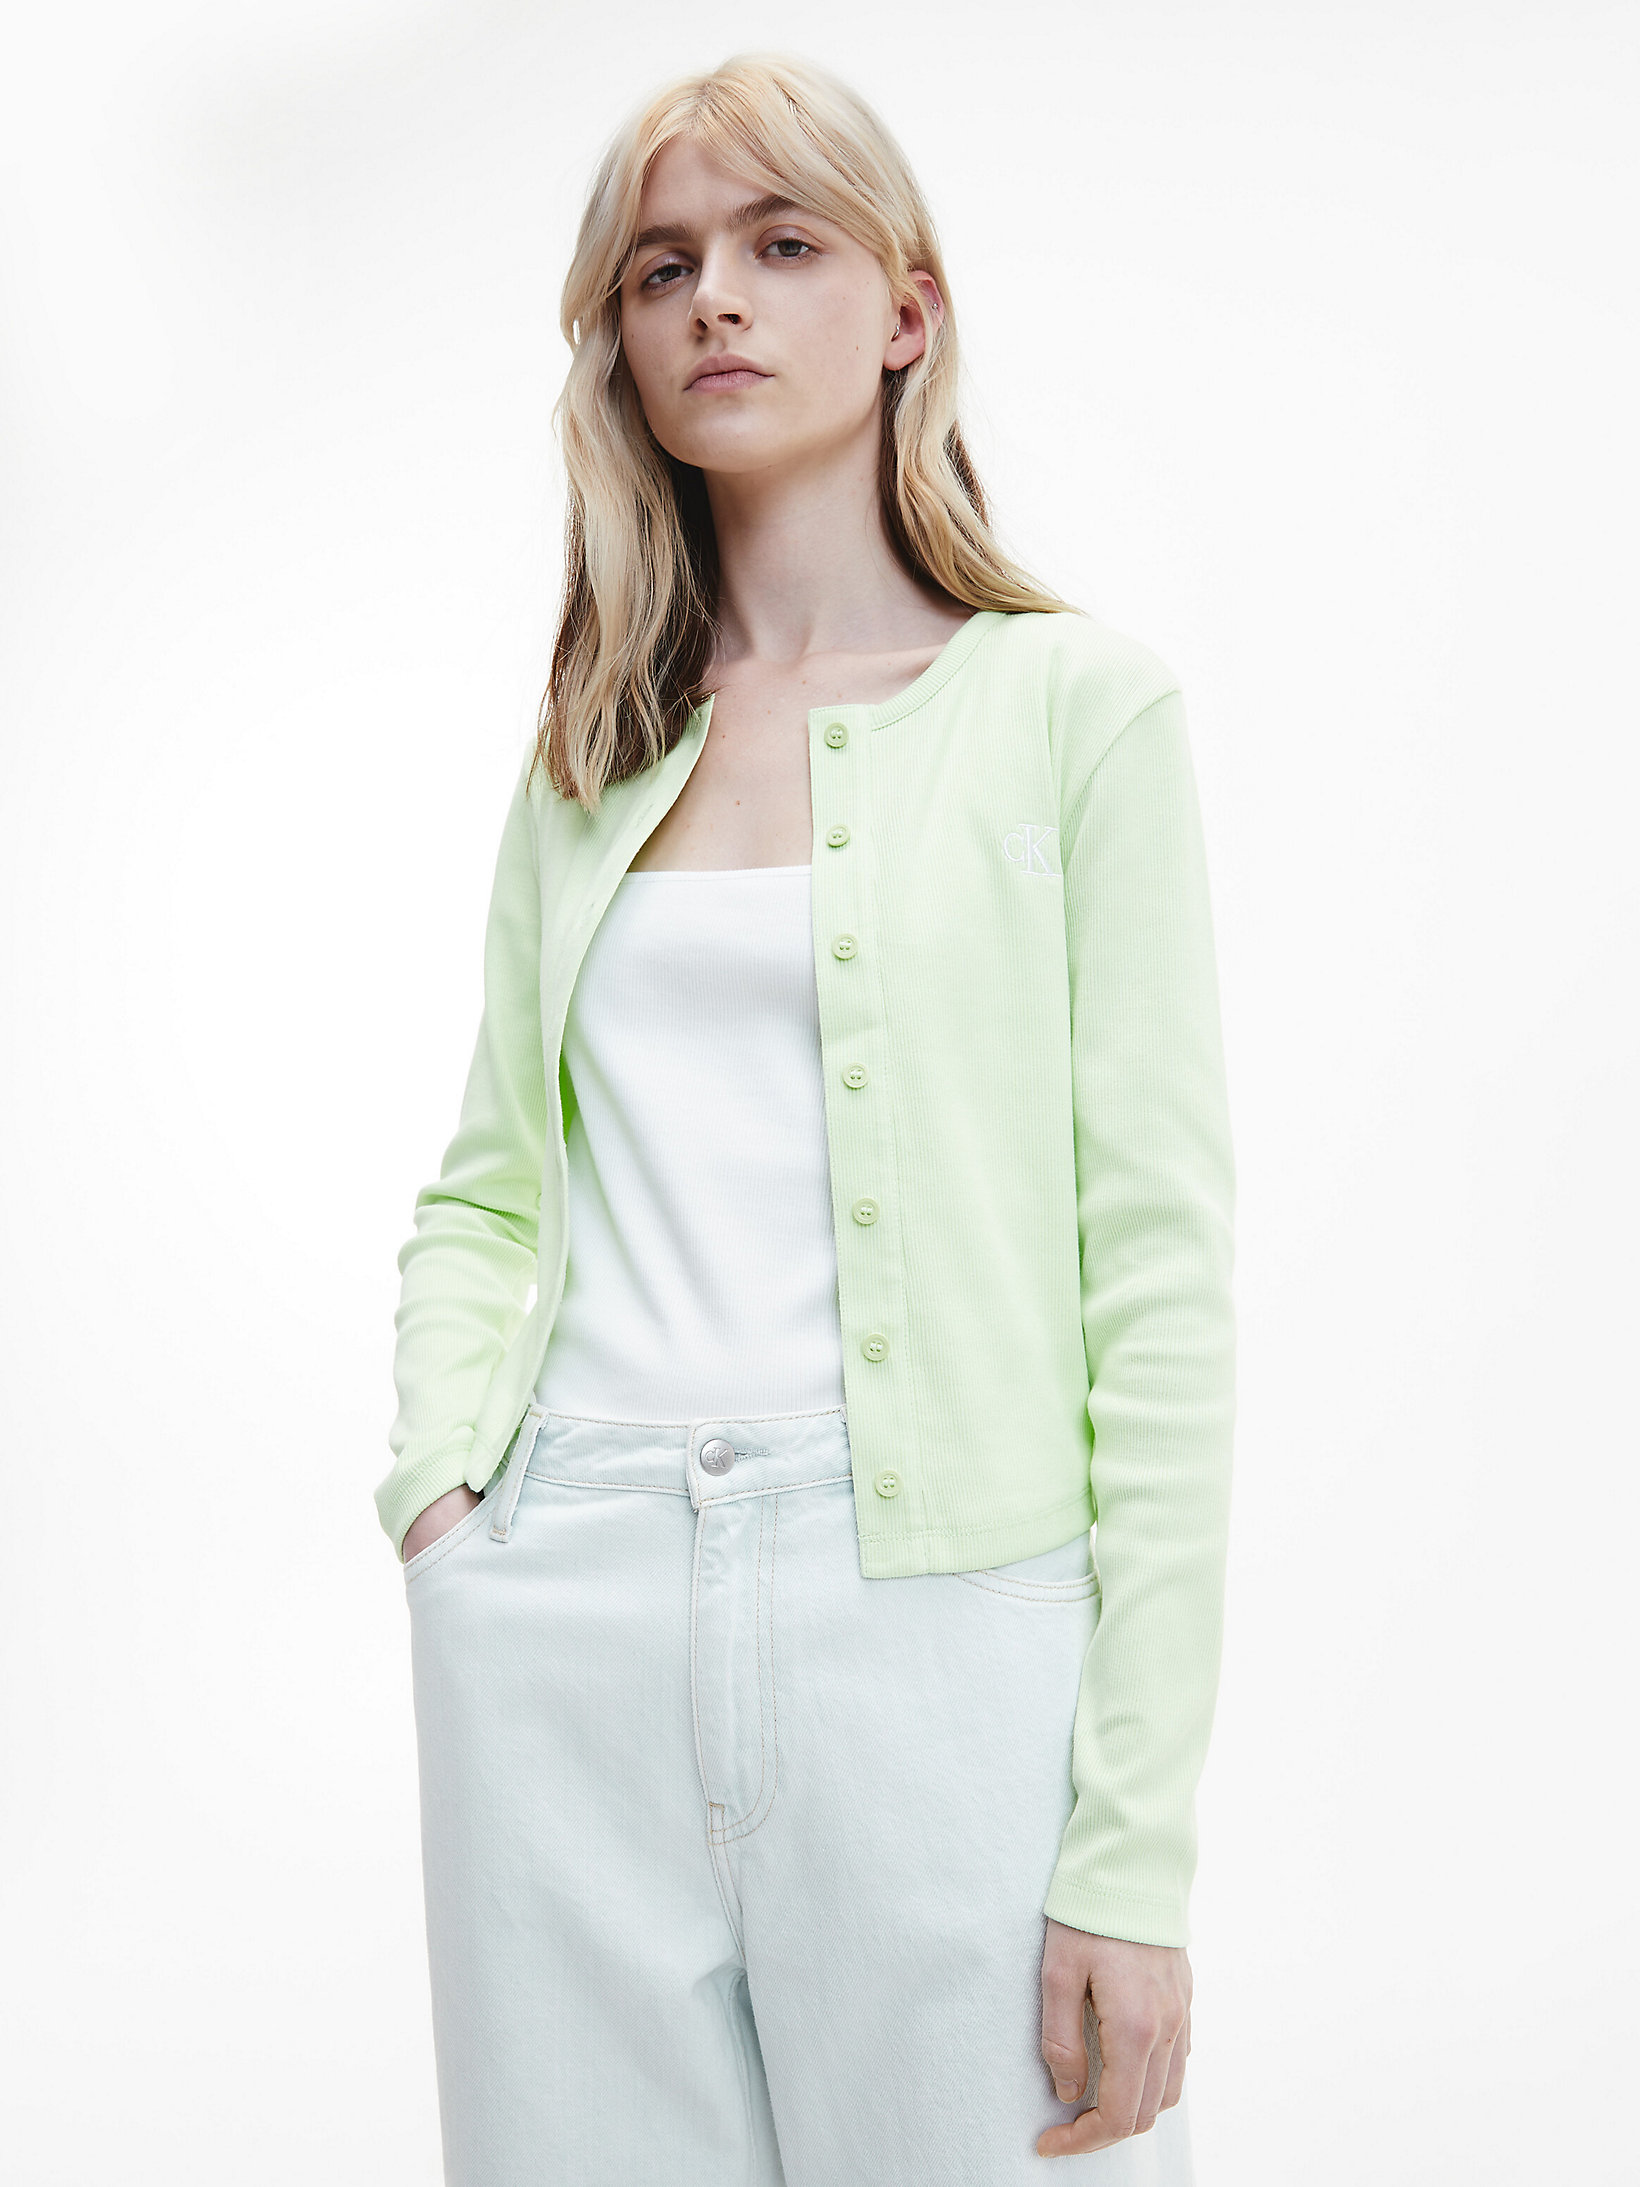 Exotic Mint Slim Ribbed Cotton Cardigan undefined women Calvin Klein